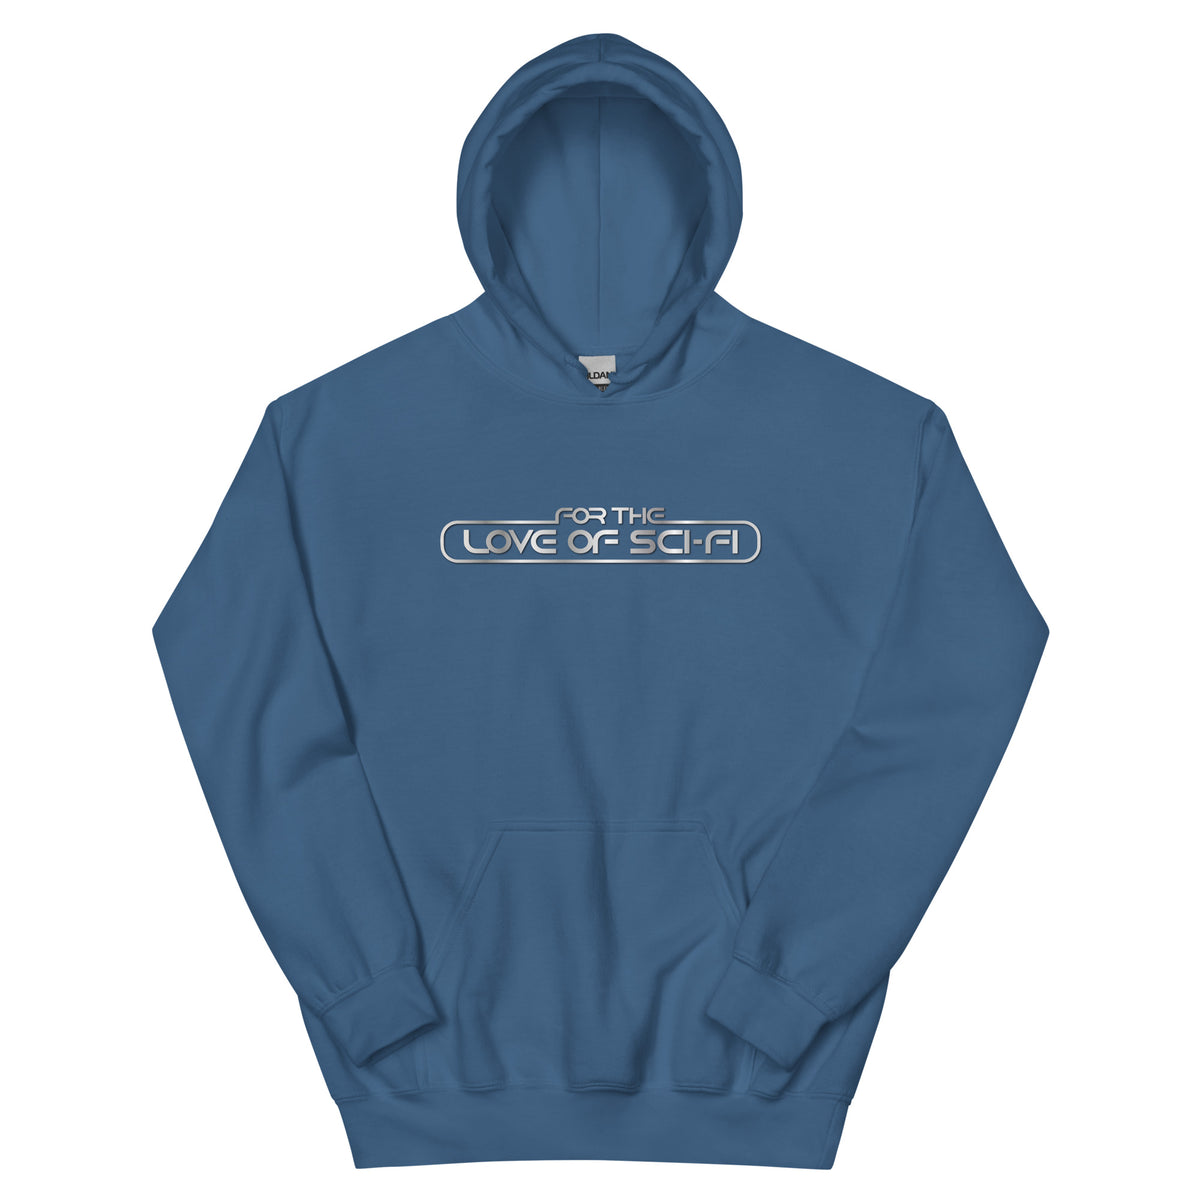 For The Love Of Sci-Fi Unisex Hoodie